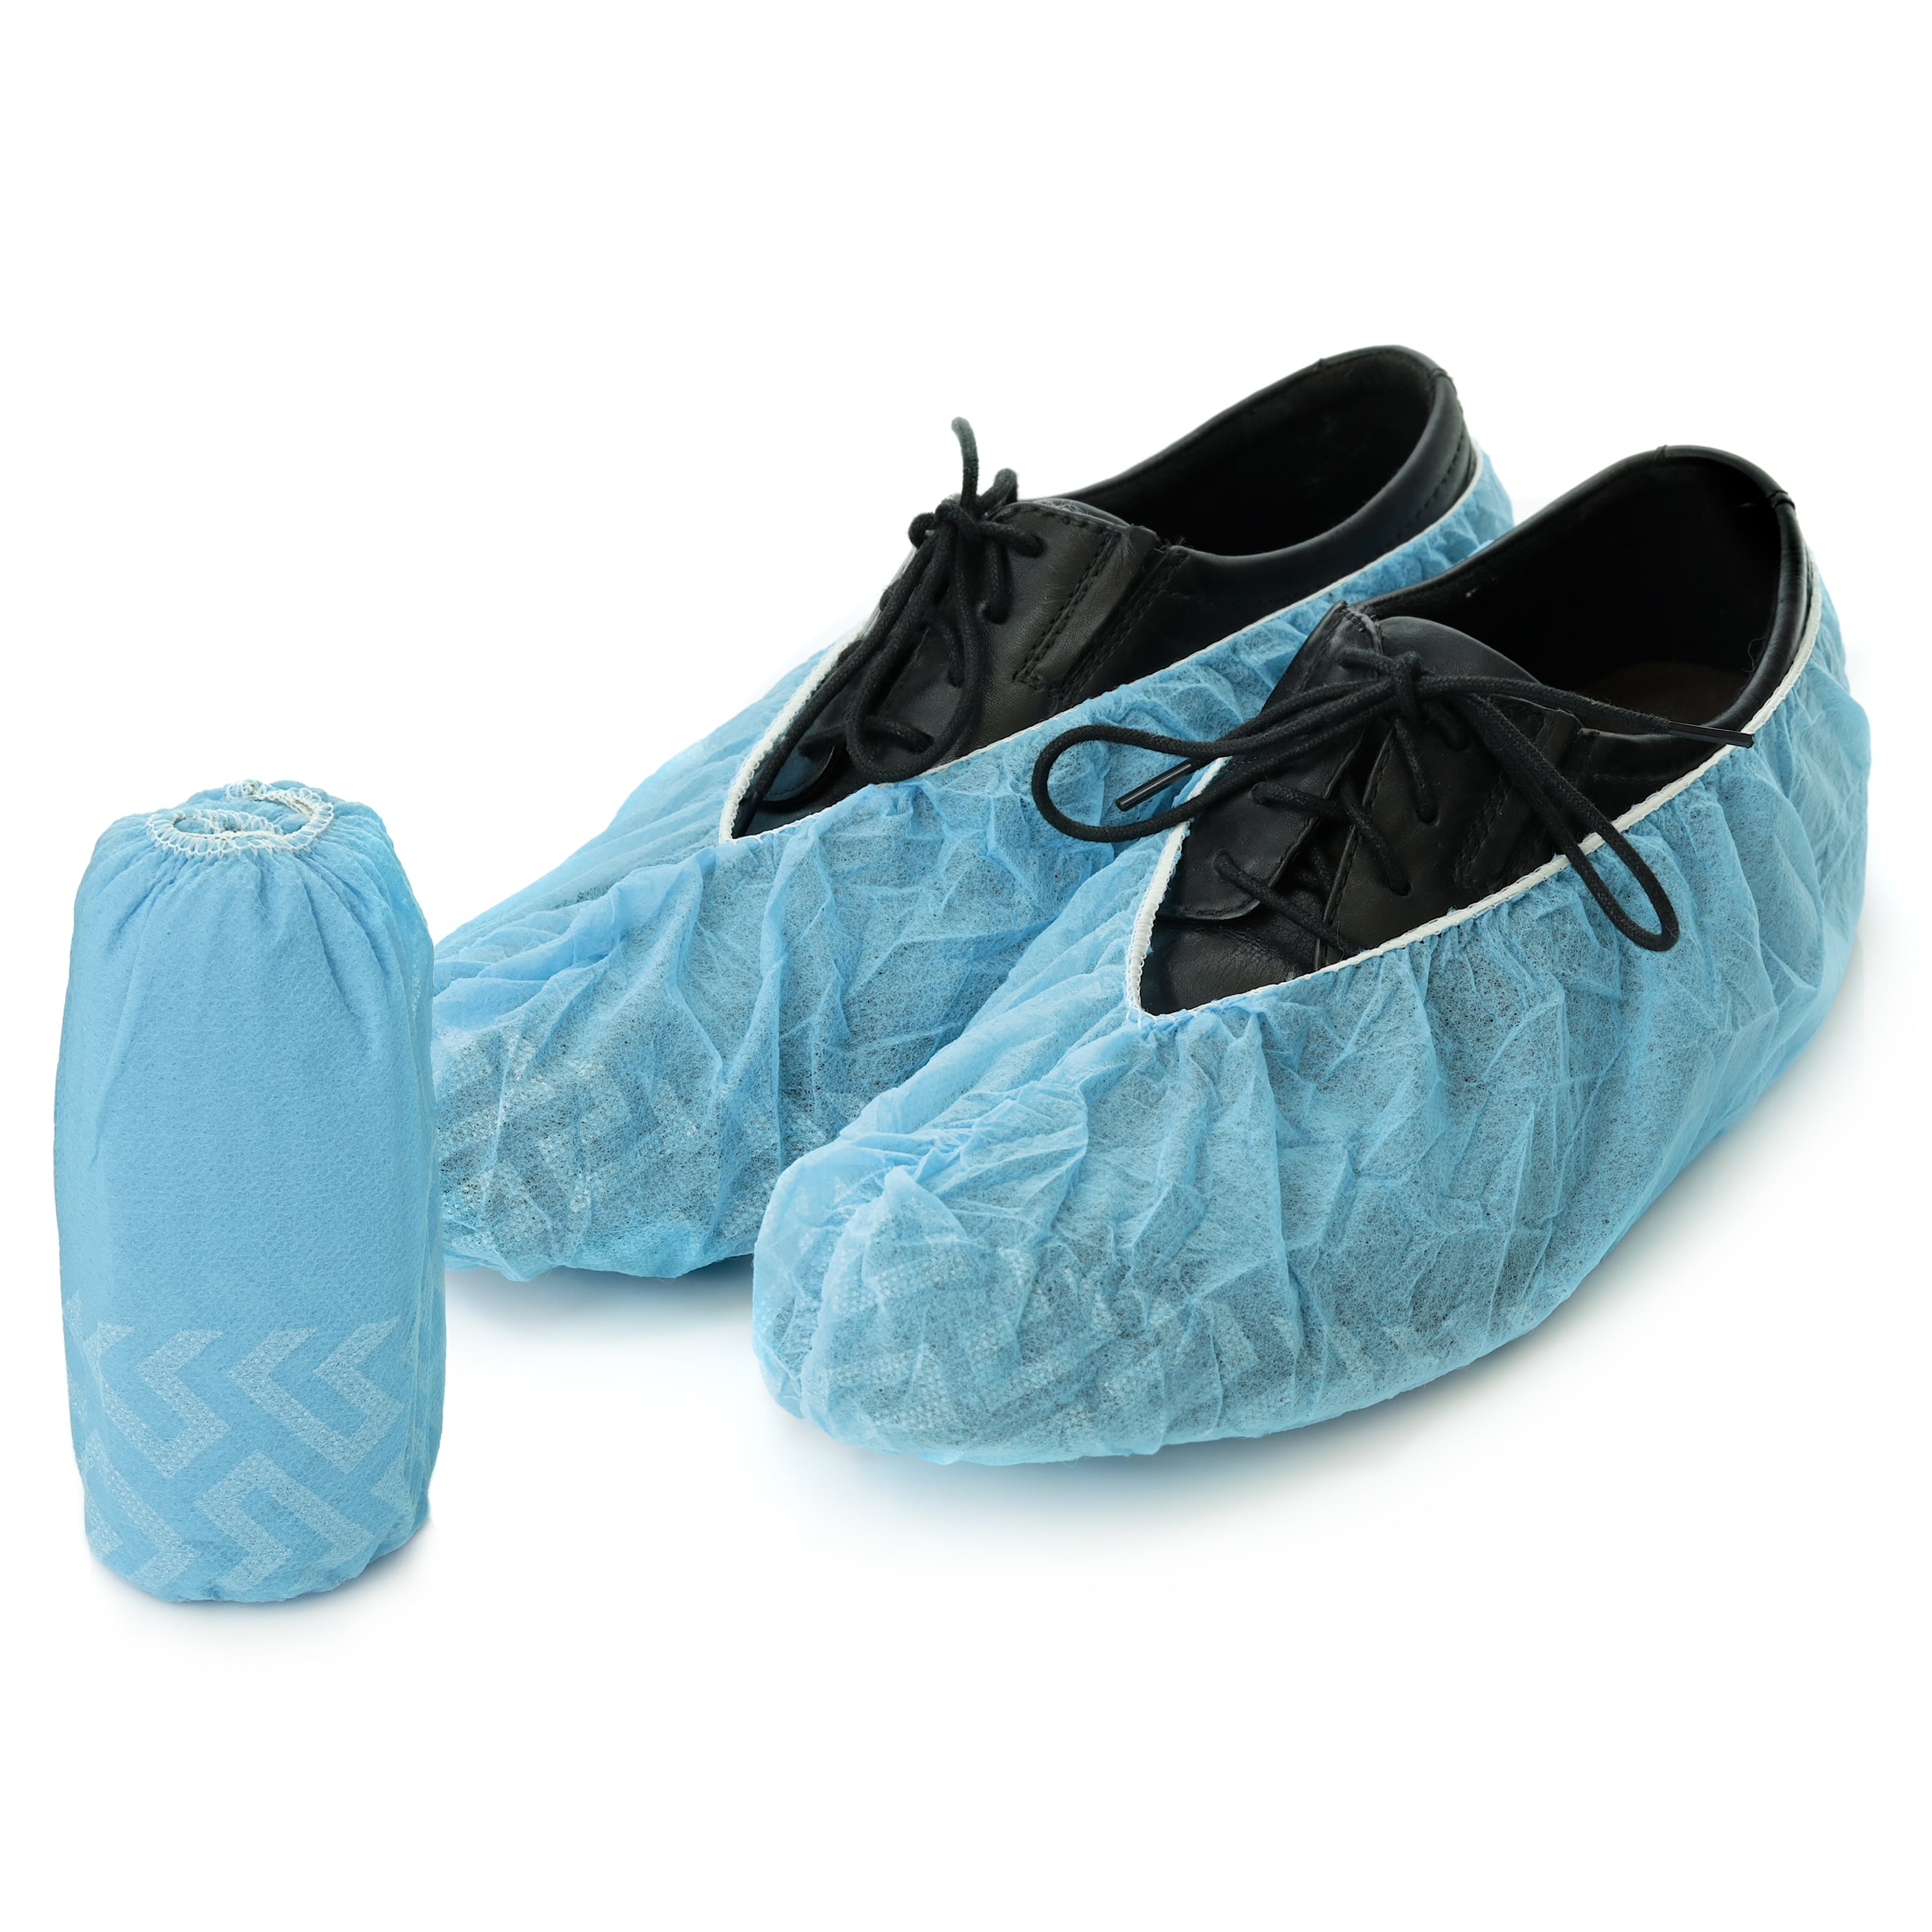 Shoe Covers Disposable Boot Cover Skin Protective For Home Non Woven Non-Slip 